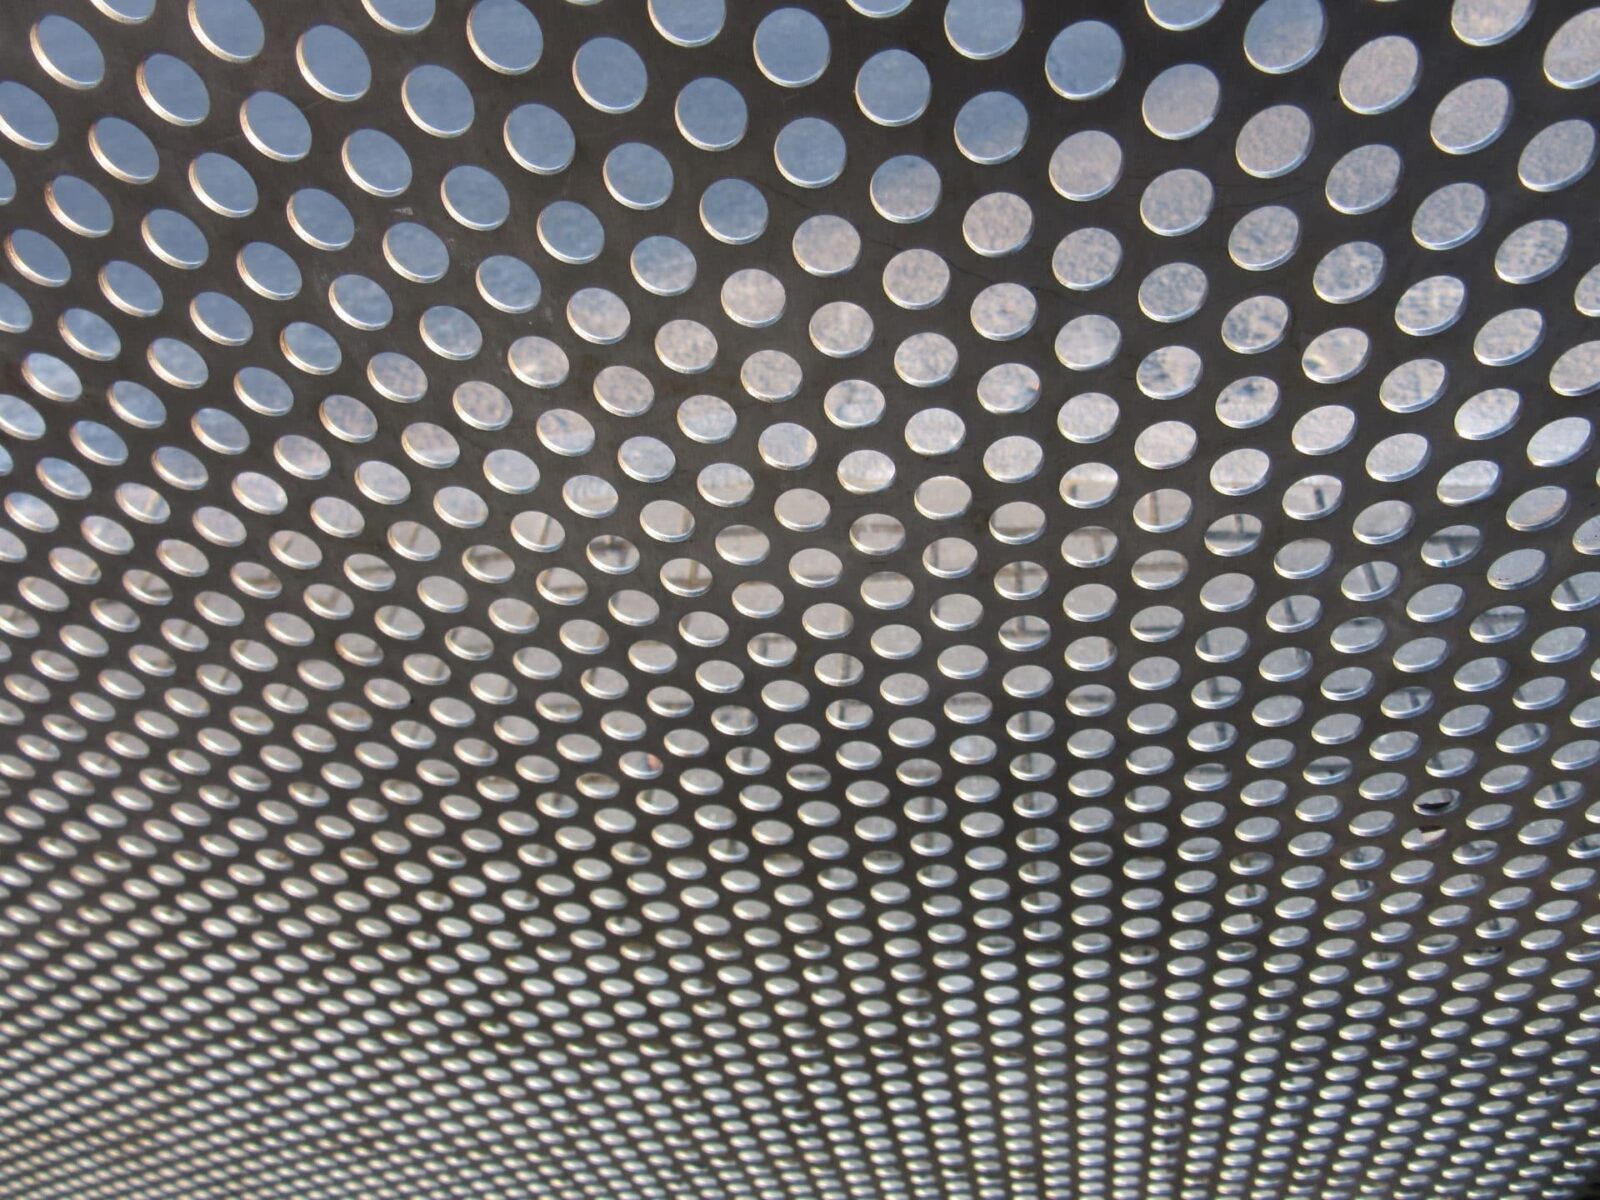 perforated steel in new york, new york perforated steel, high-grade perforated steel, top perforated steel new york